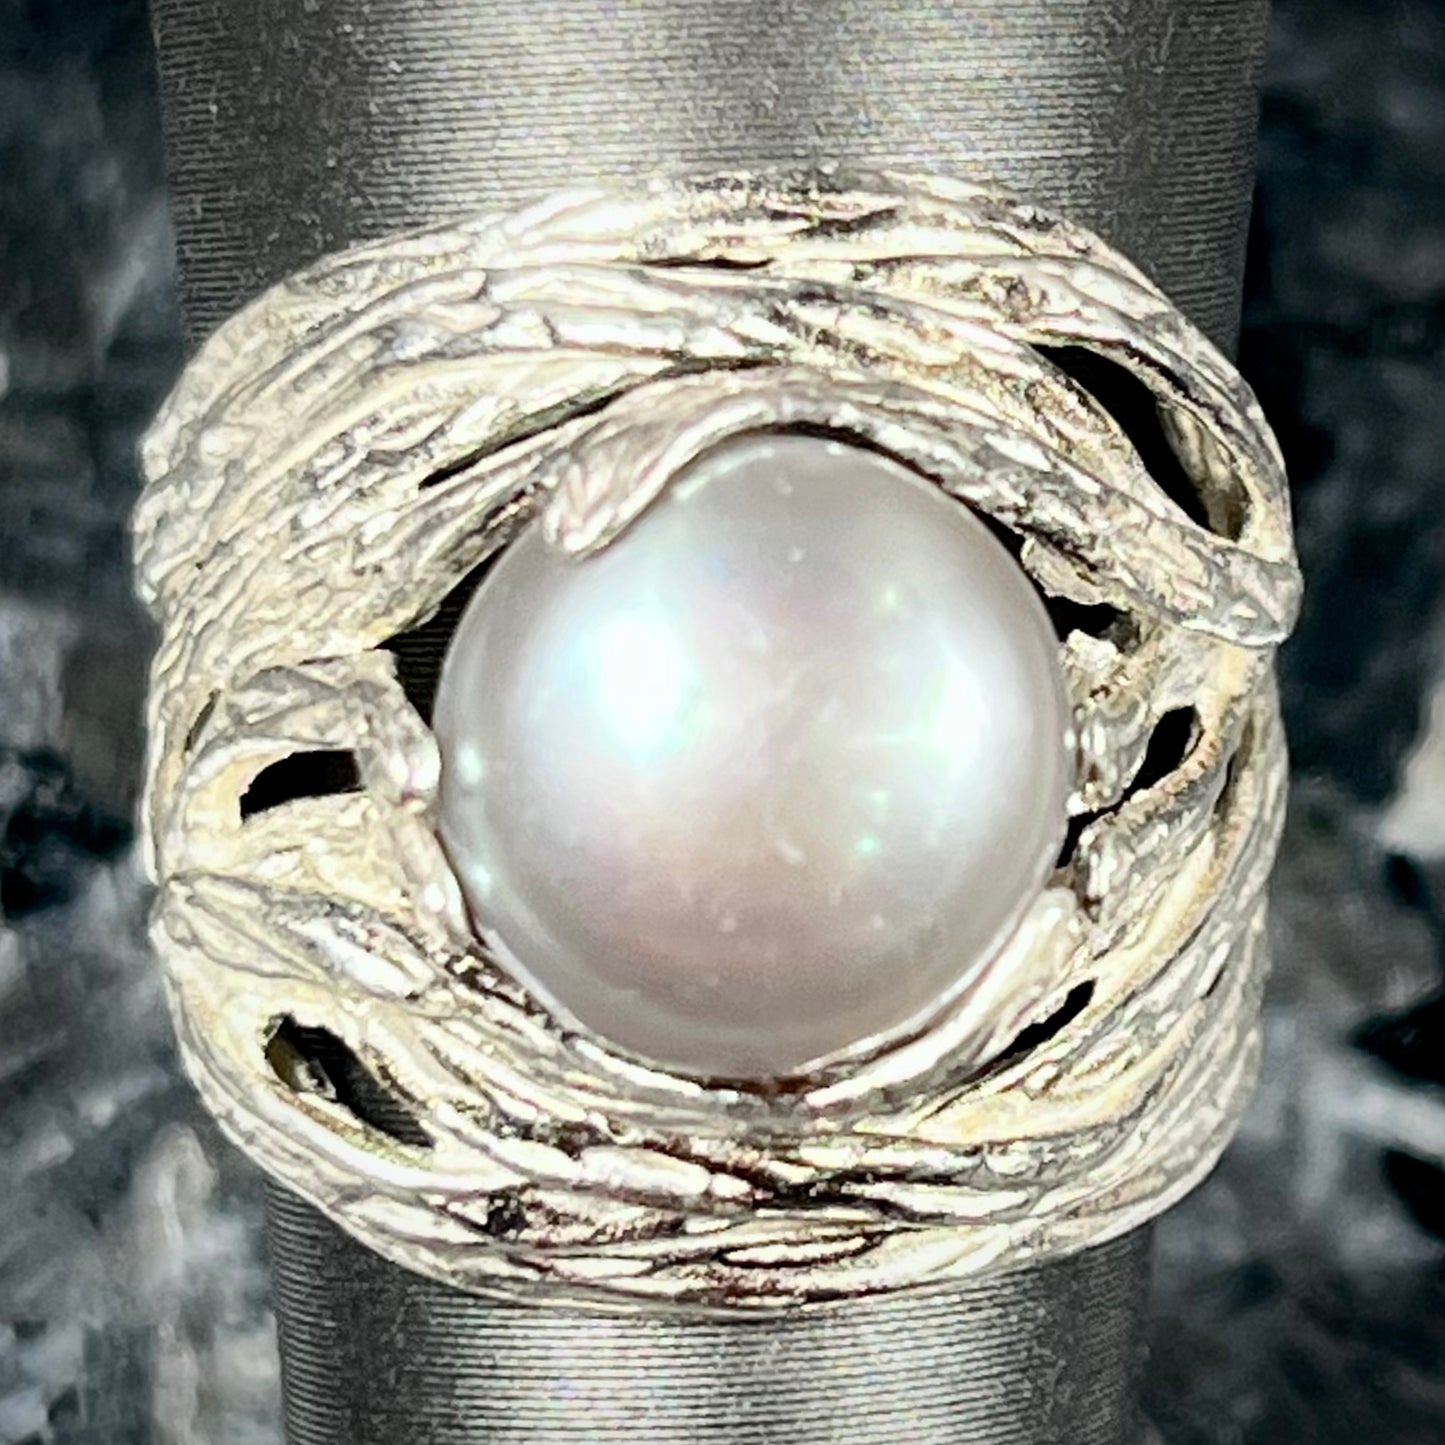 Organic Style Pearl Ring | Sterling Silver